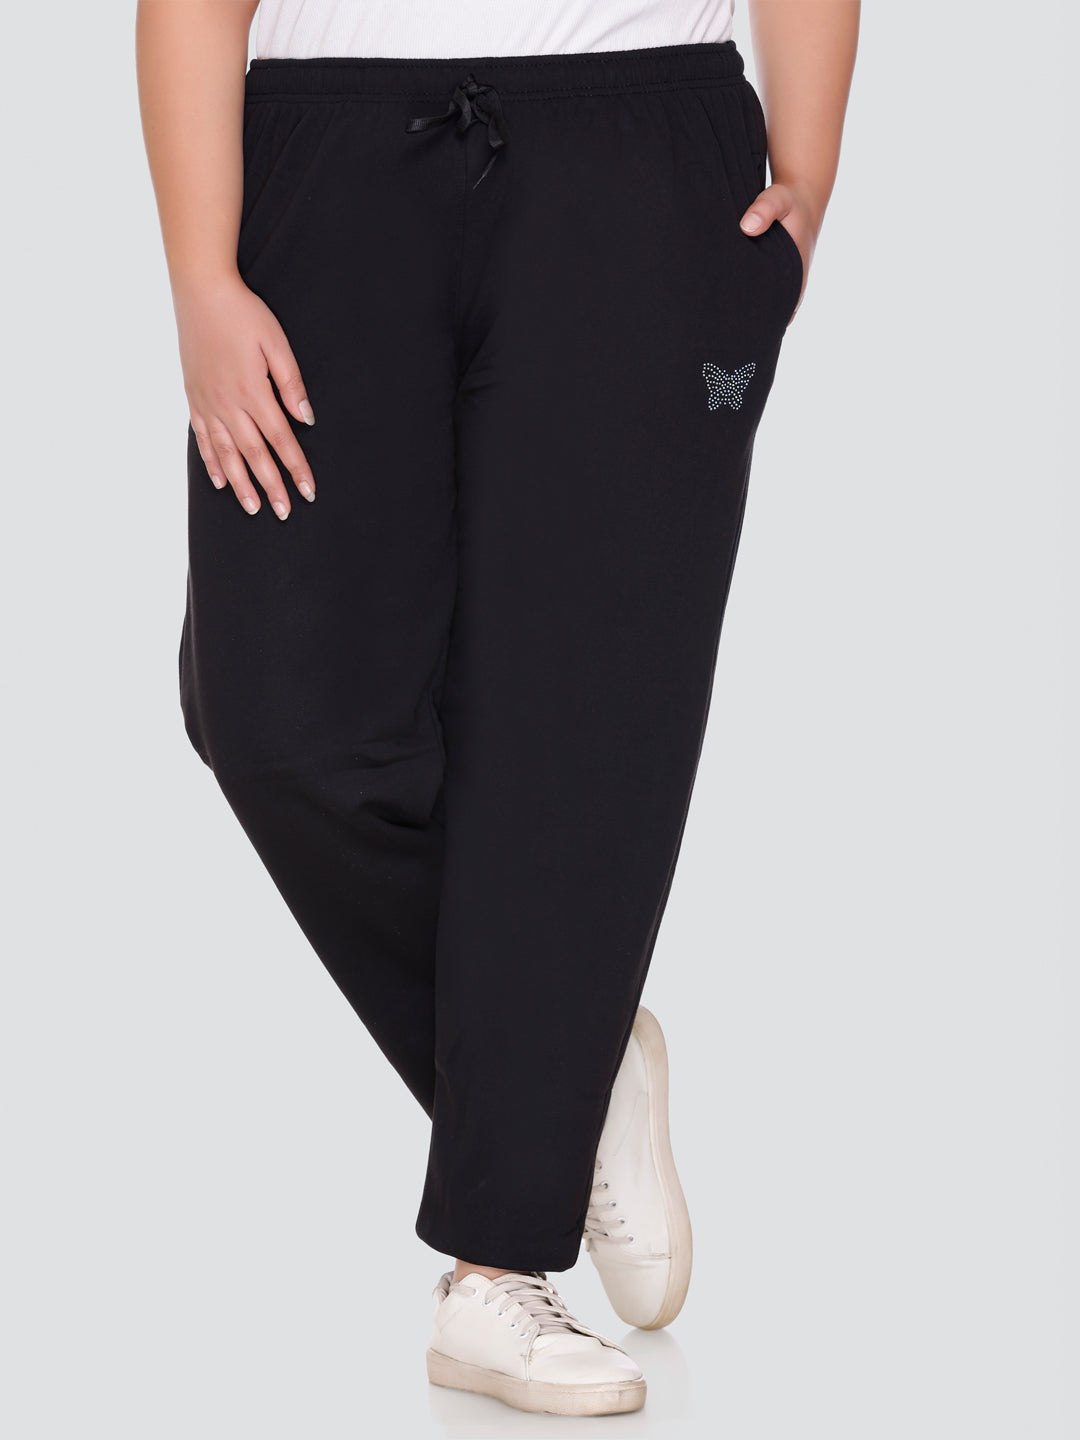 Buy Nexsus Apparels - Active wear Gym Pants || Active Yoga Pants for Women's  Gym High Waist Pants || Track Pant || (103) Online In India At Discounted  Prices